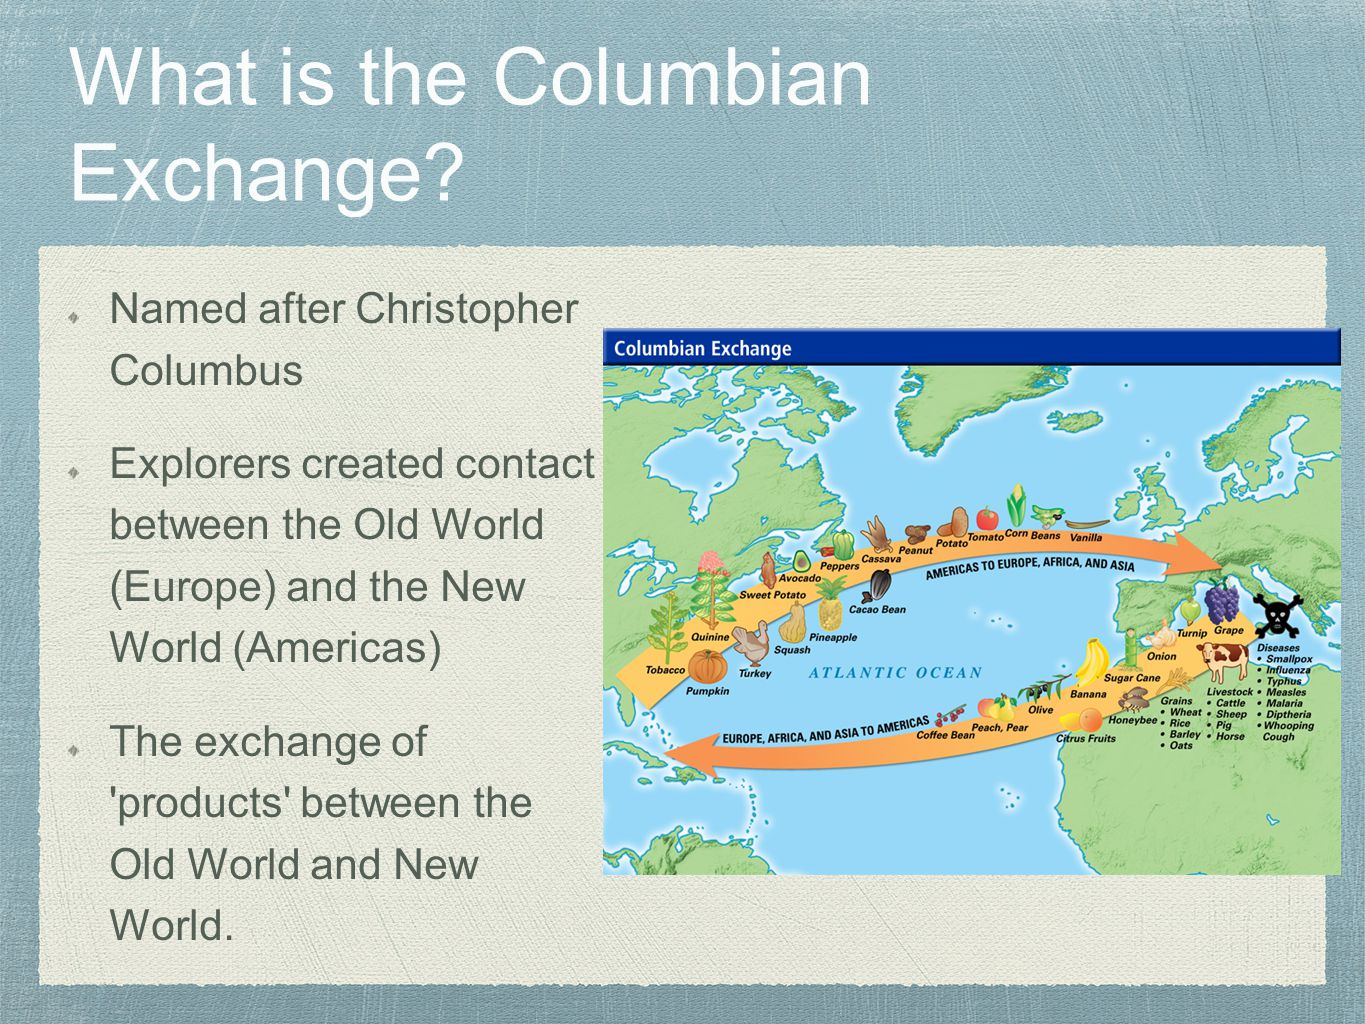 what were the demographic effects of the columbian exchange